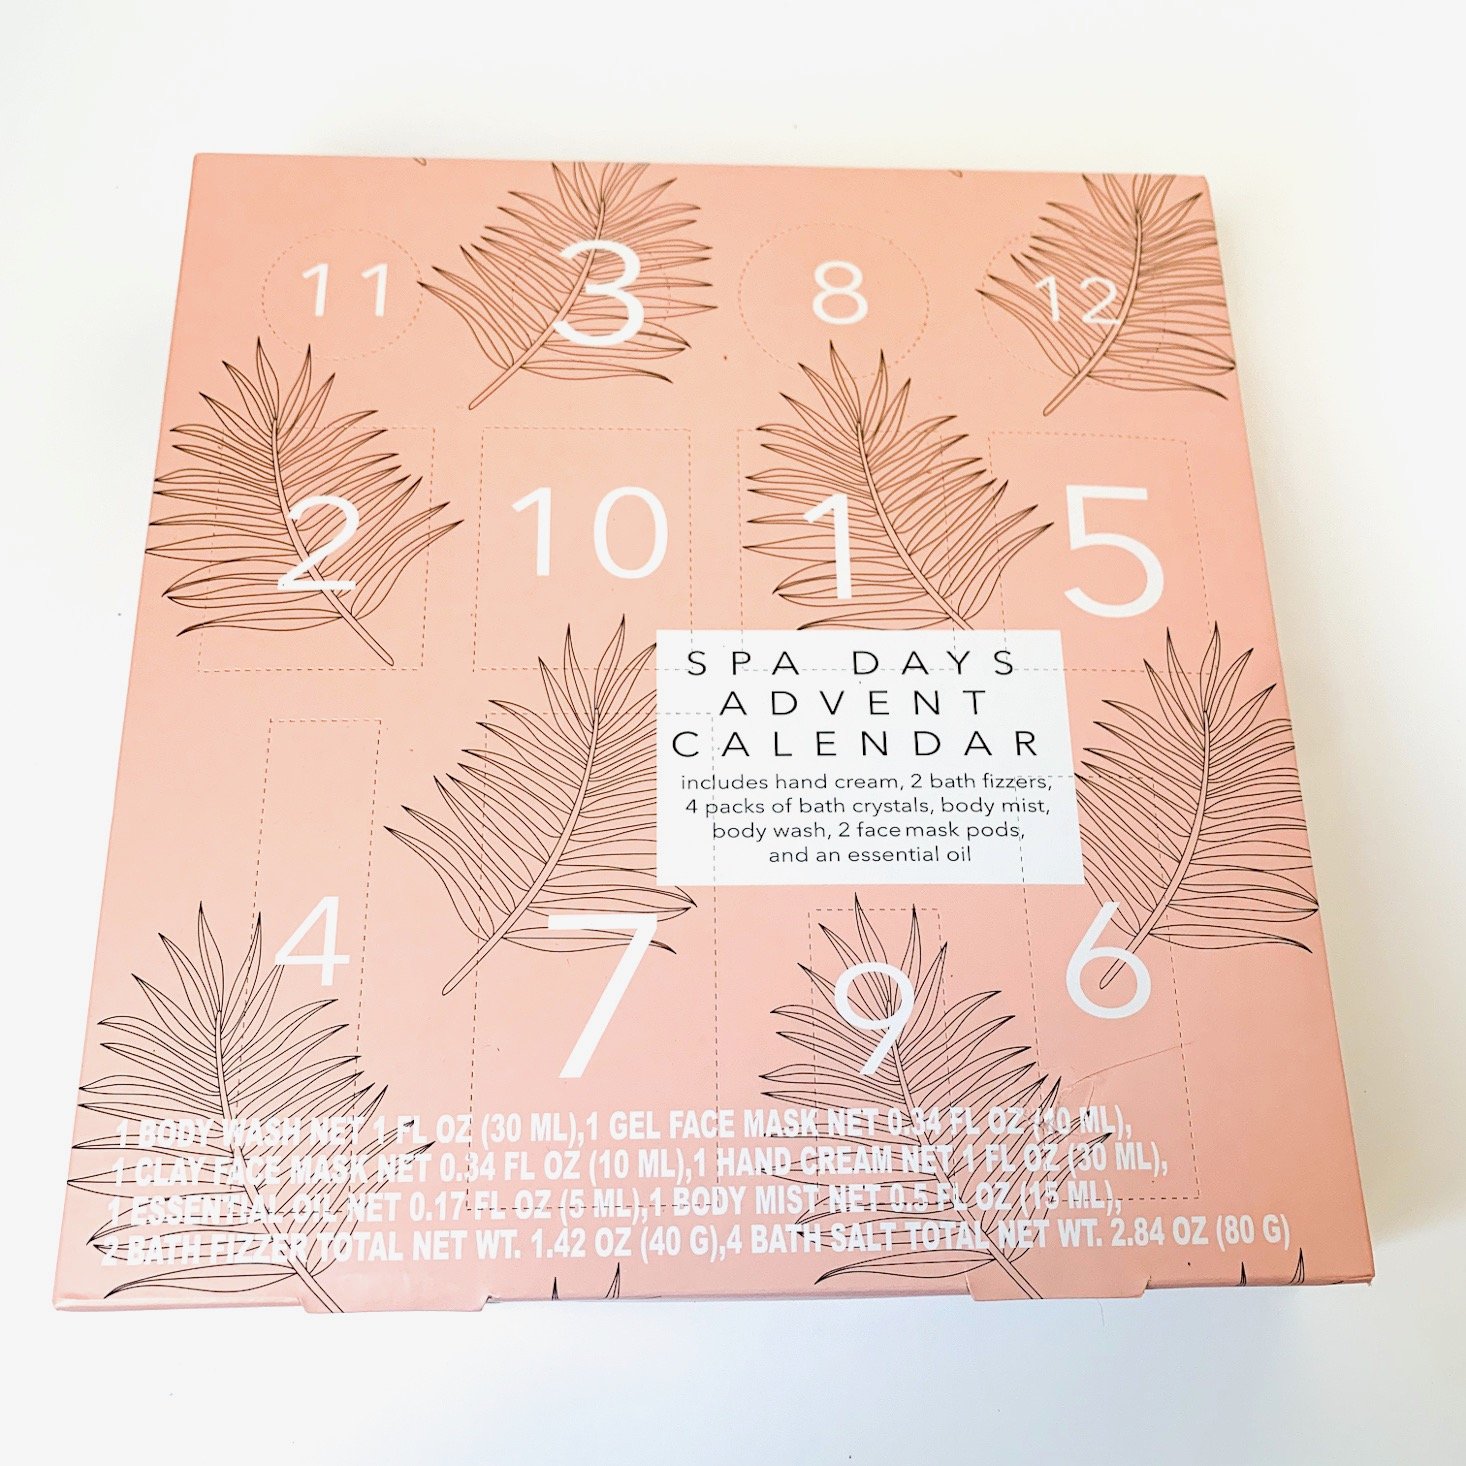 Target Spa Advent Calendar Review – Holiday 2019